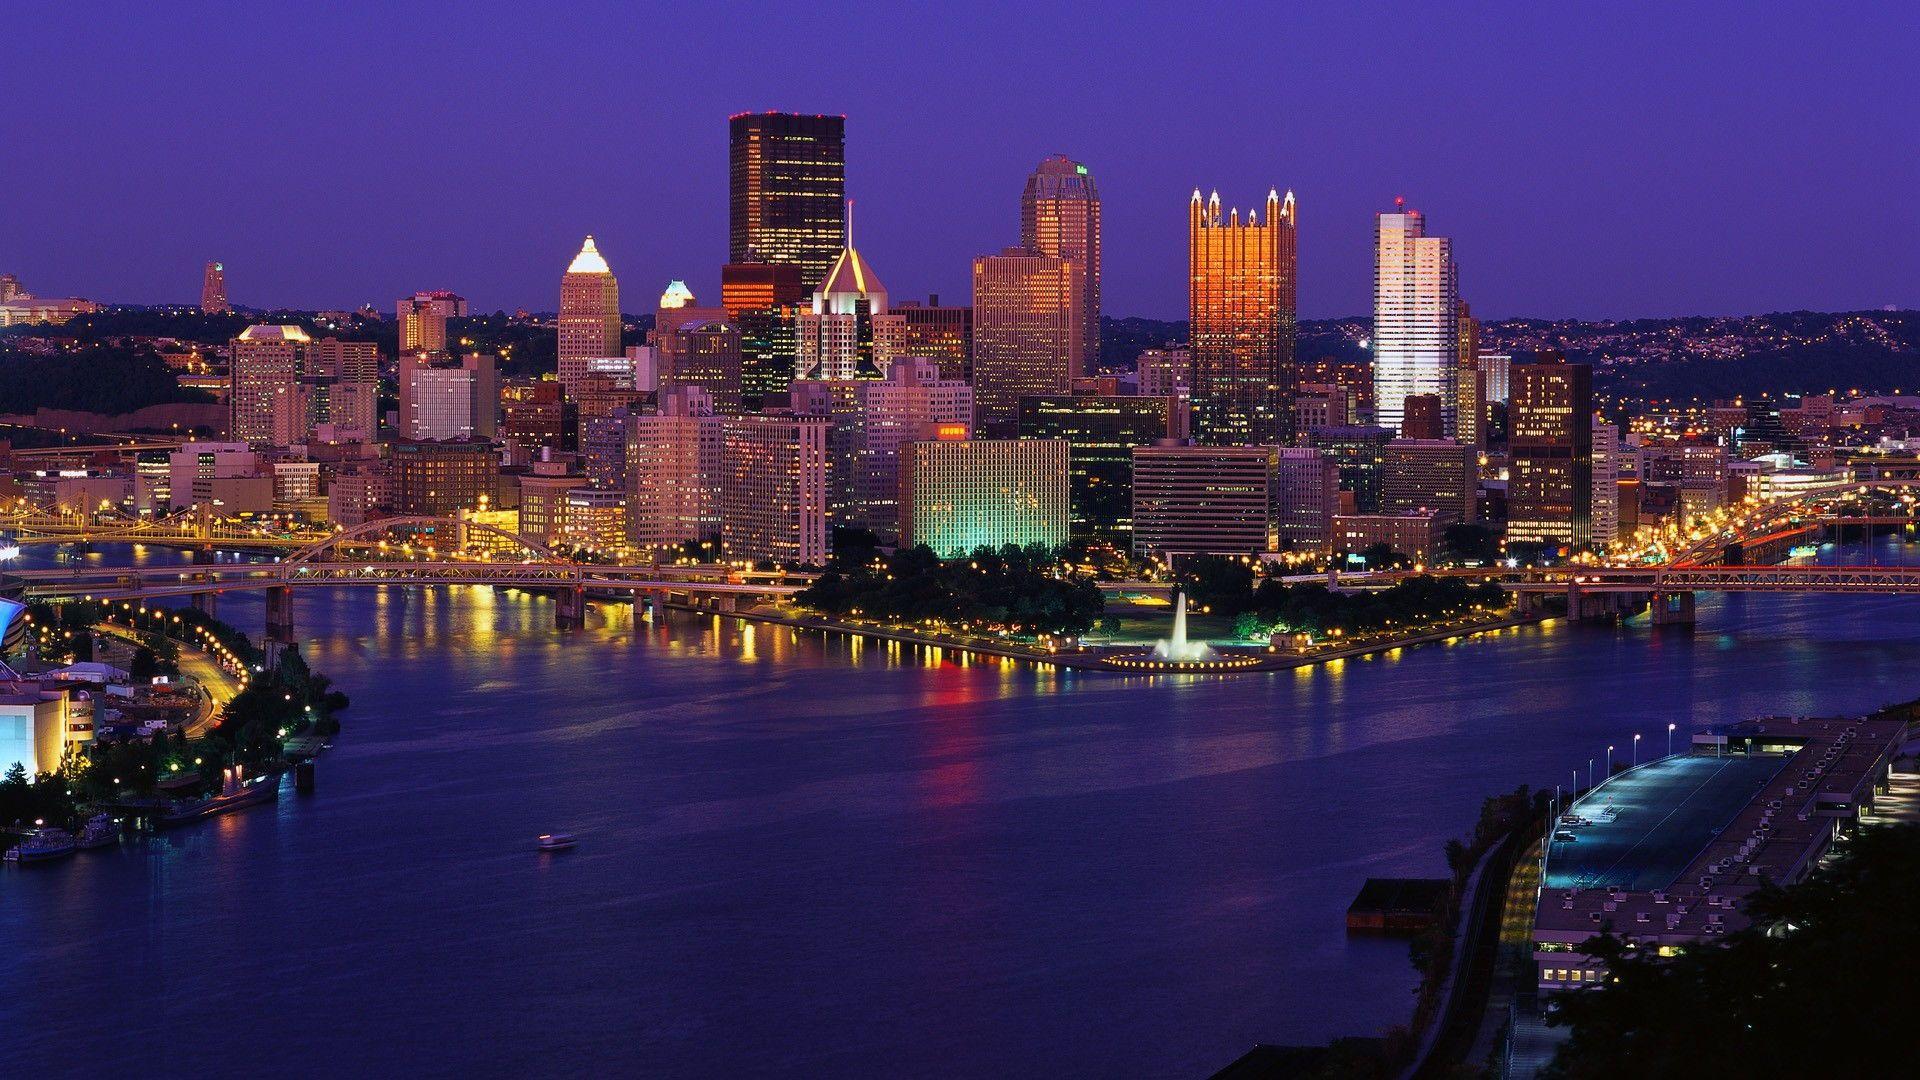 Pittsburgh Skyline at Night Wallpaper. pittsburgh skyline picture